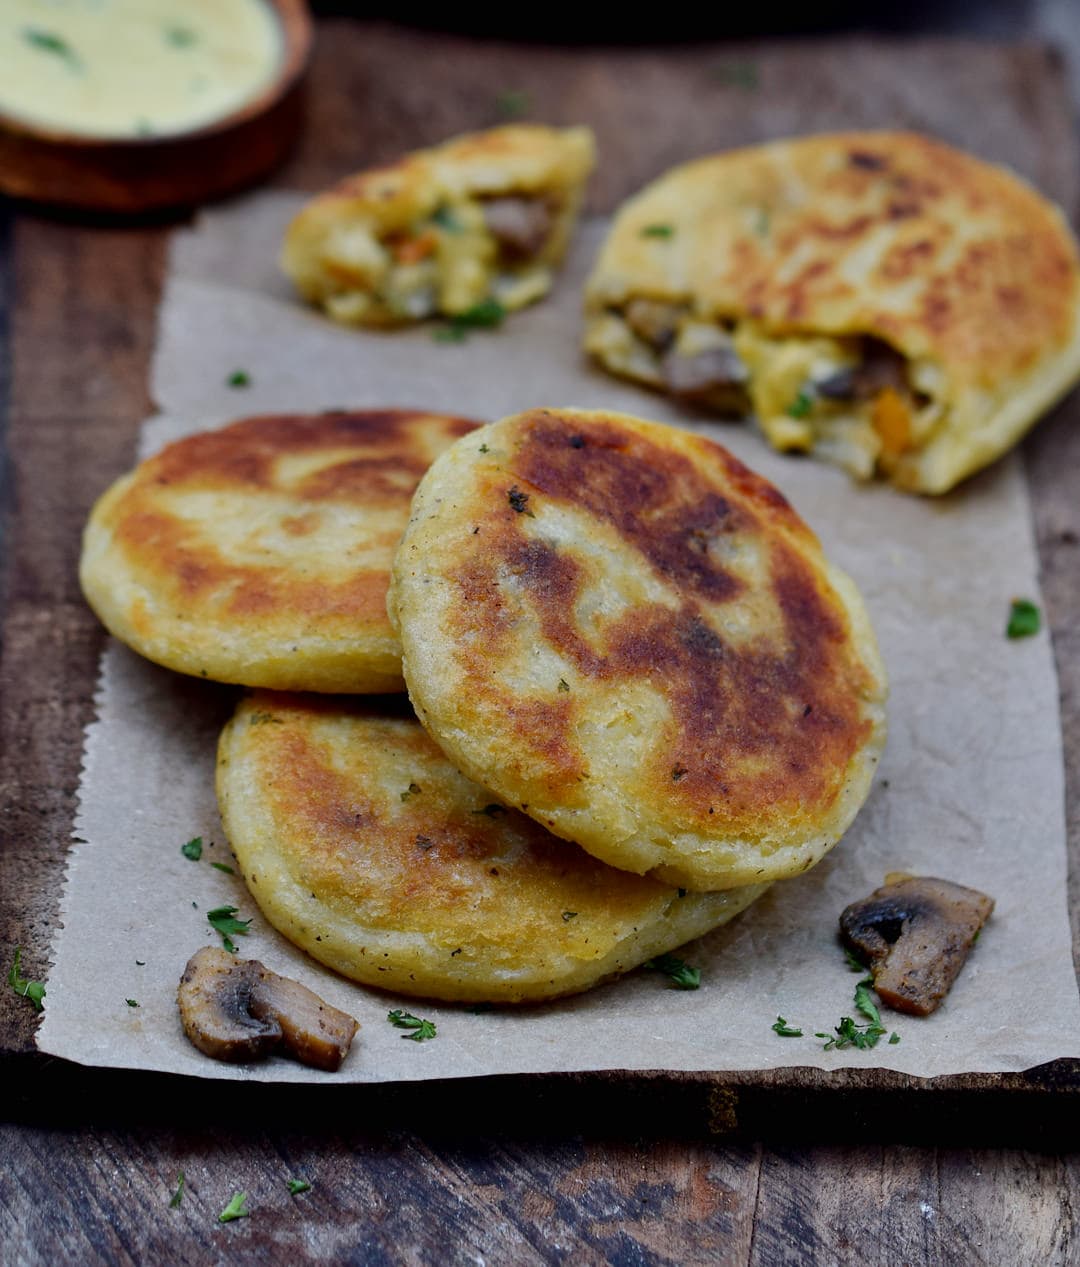 savory pancakes made from mashed potatoes